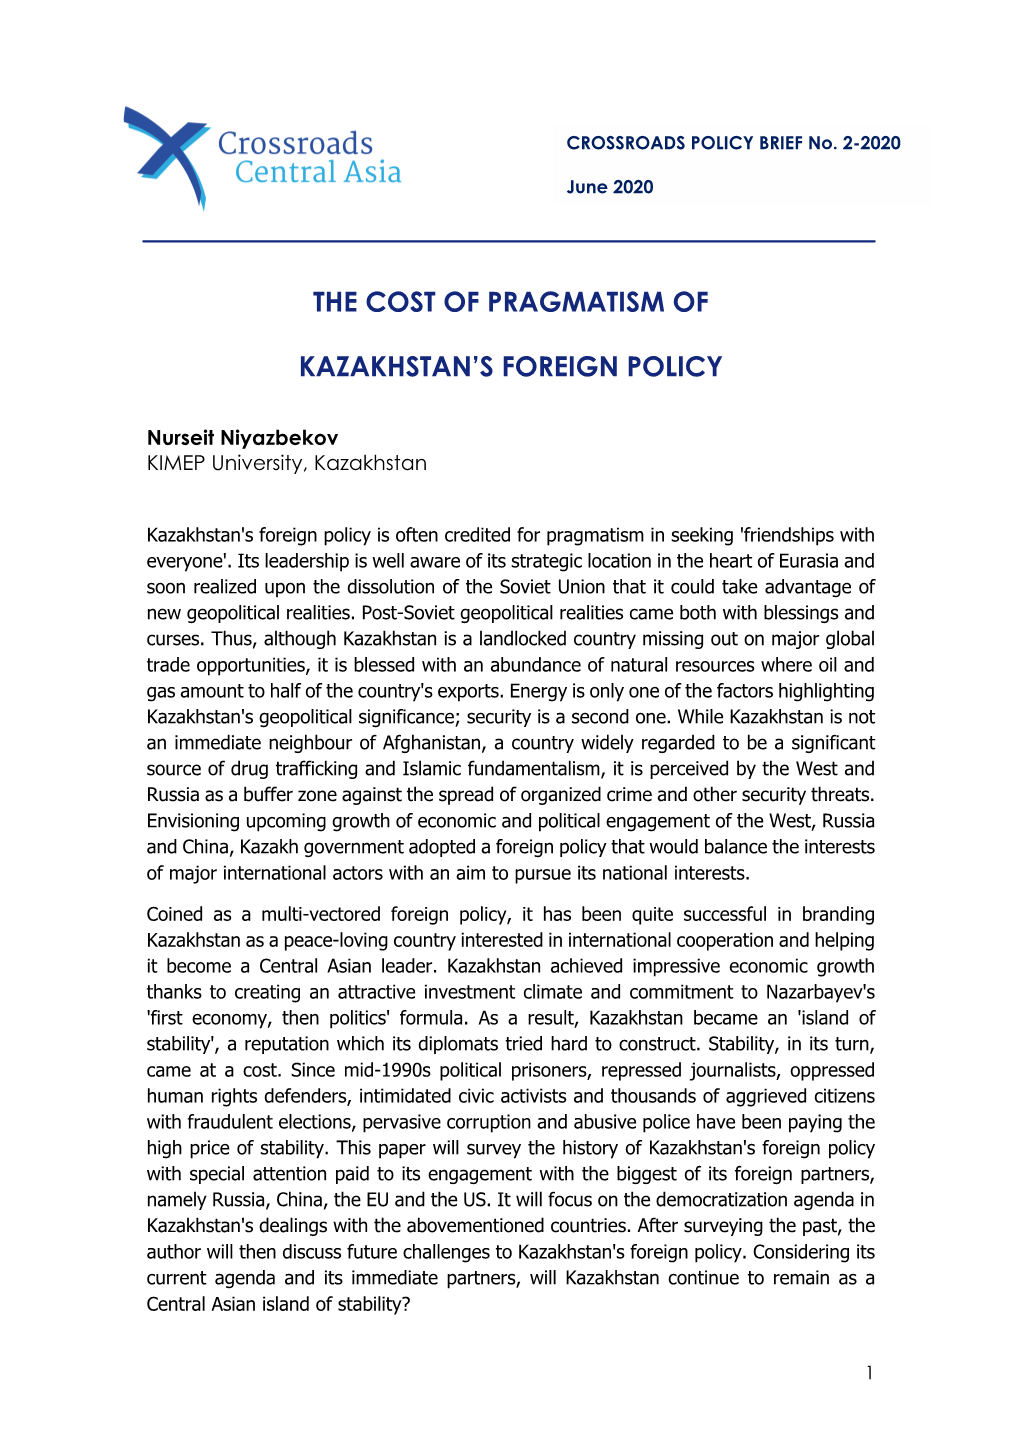 The Cost of Pragmatism of Kazakhstan's Foreign Policy